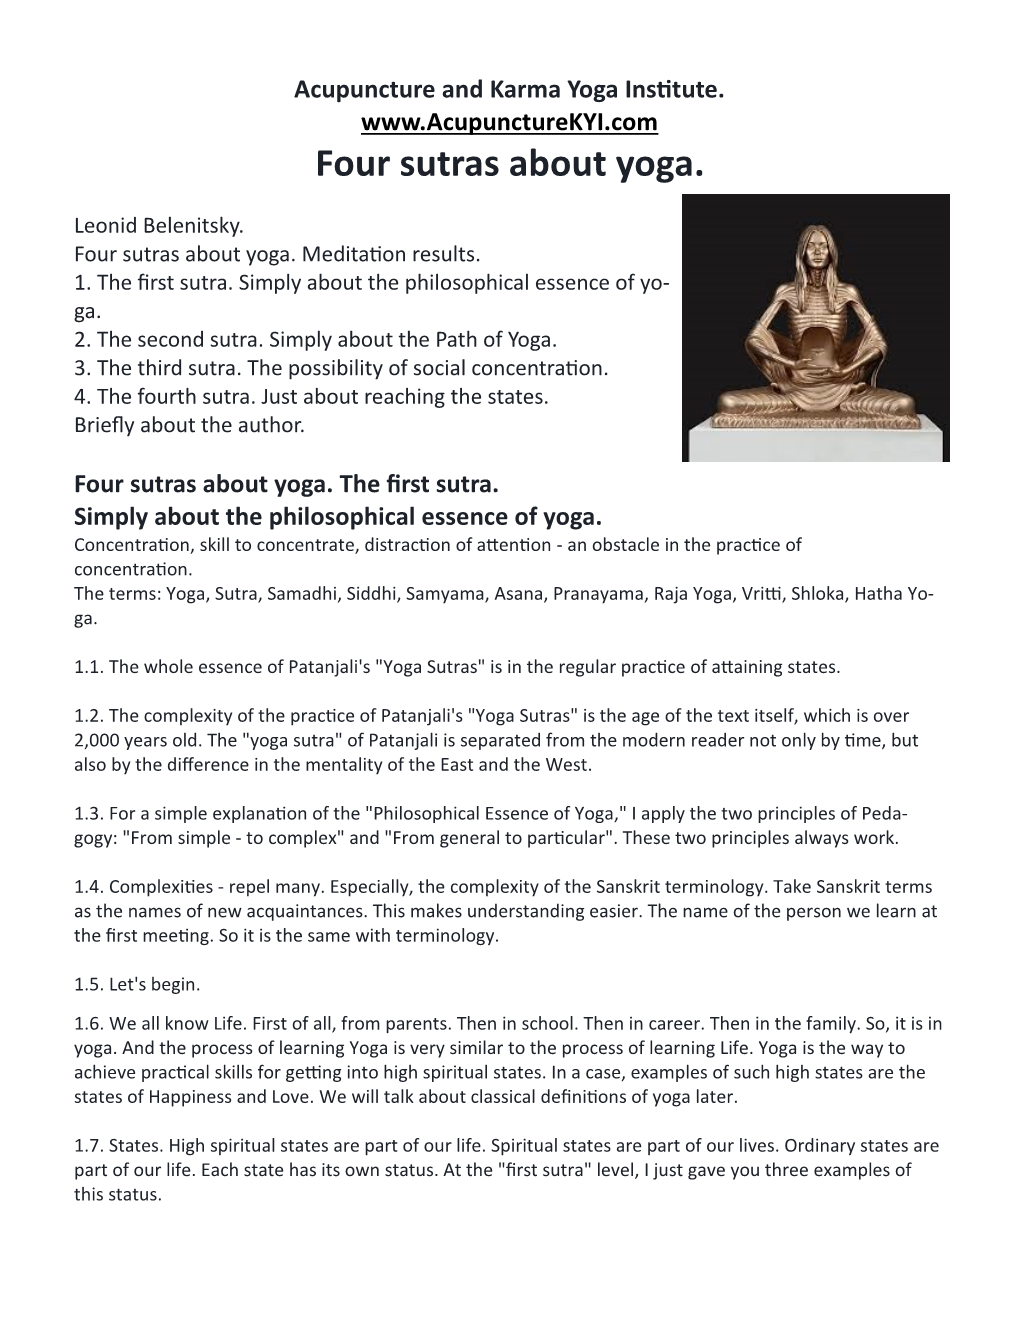 Four Sutras About Yoga